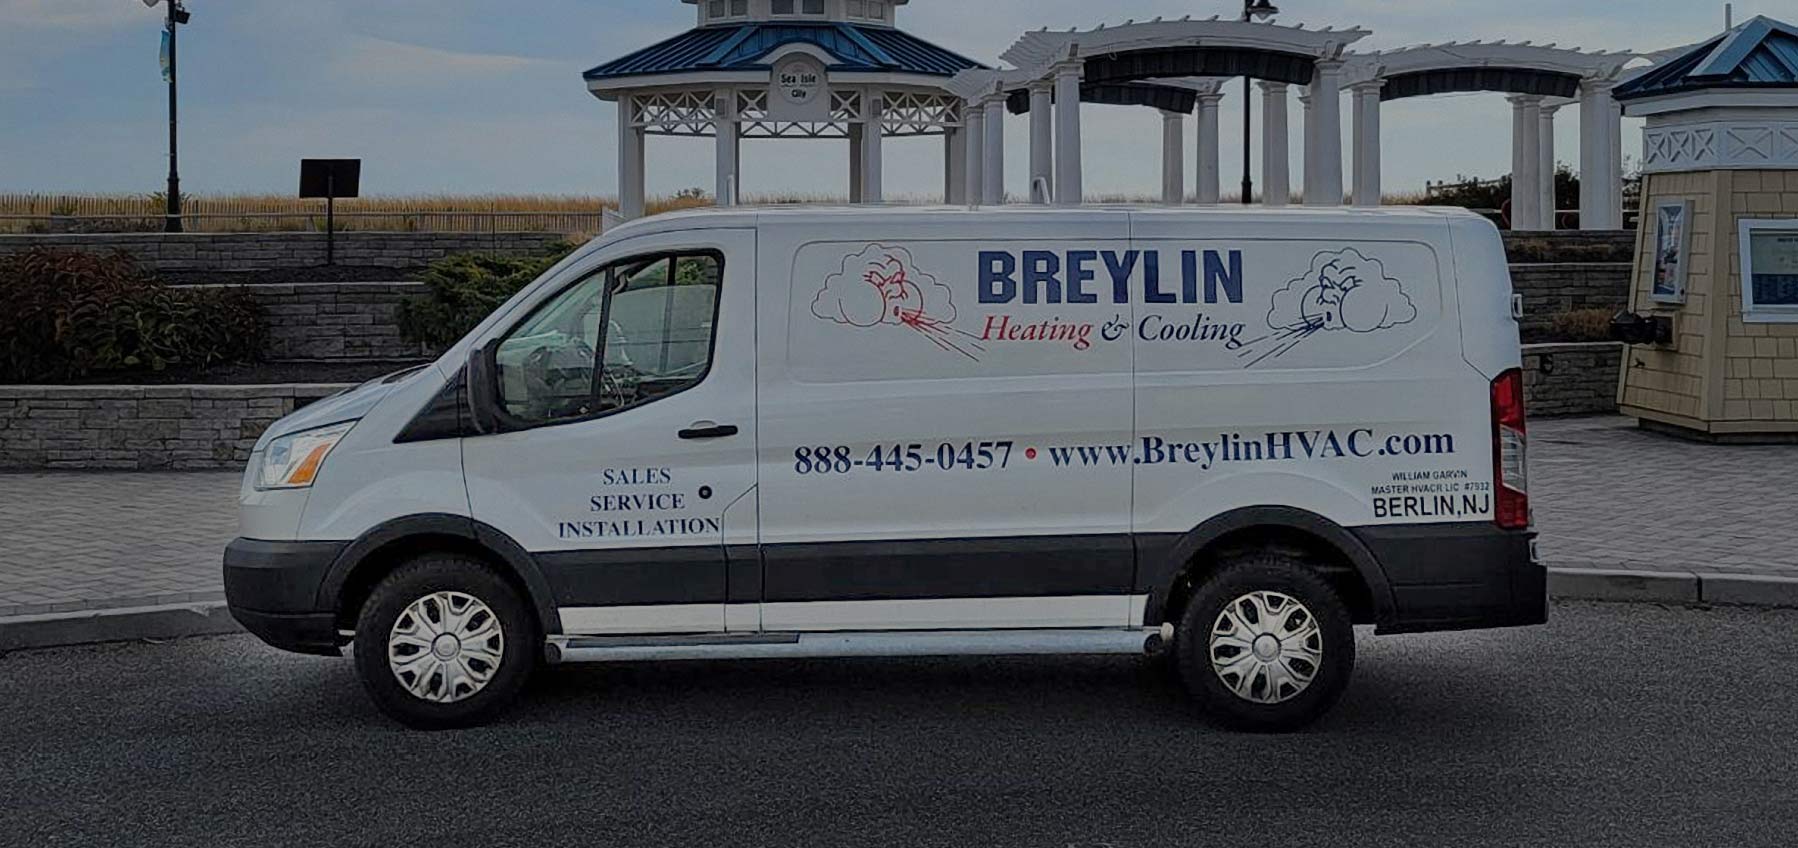 Breylin Heating & Cooling | South Jersey Heater Air Conditioner HVAC Service